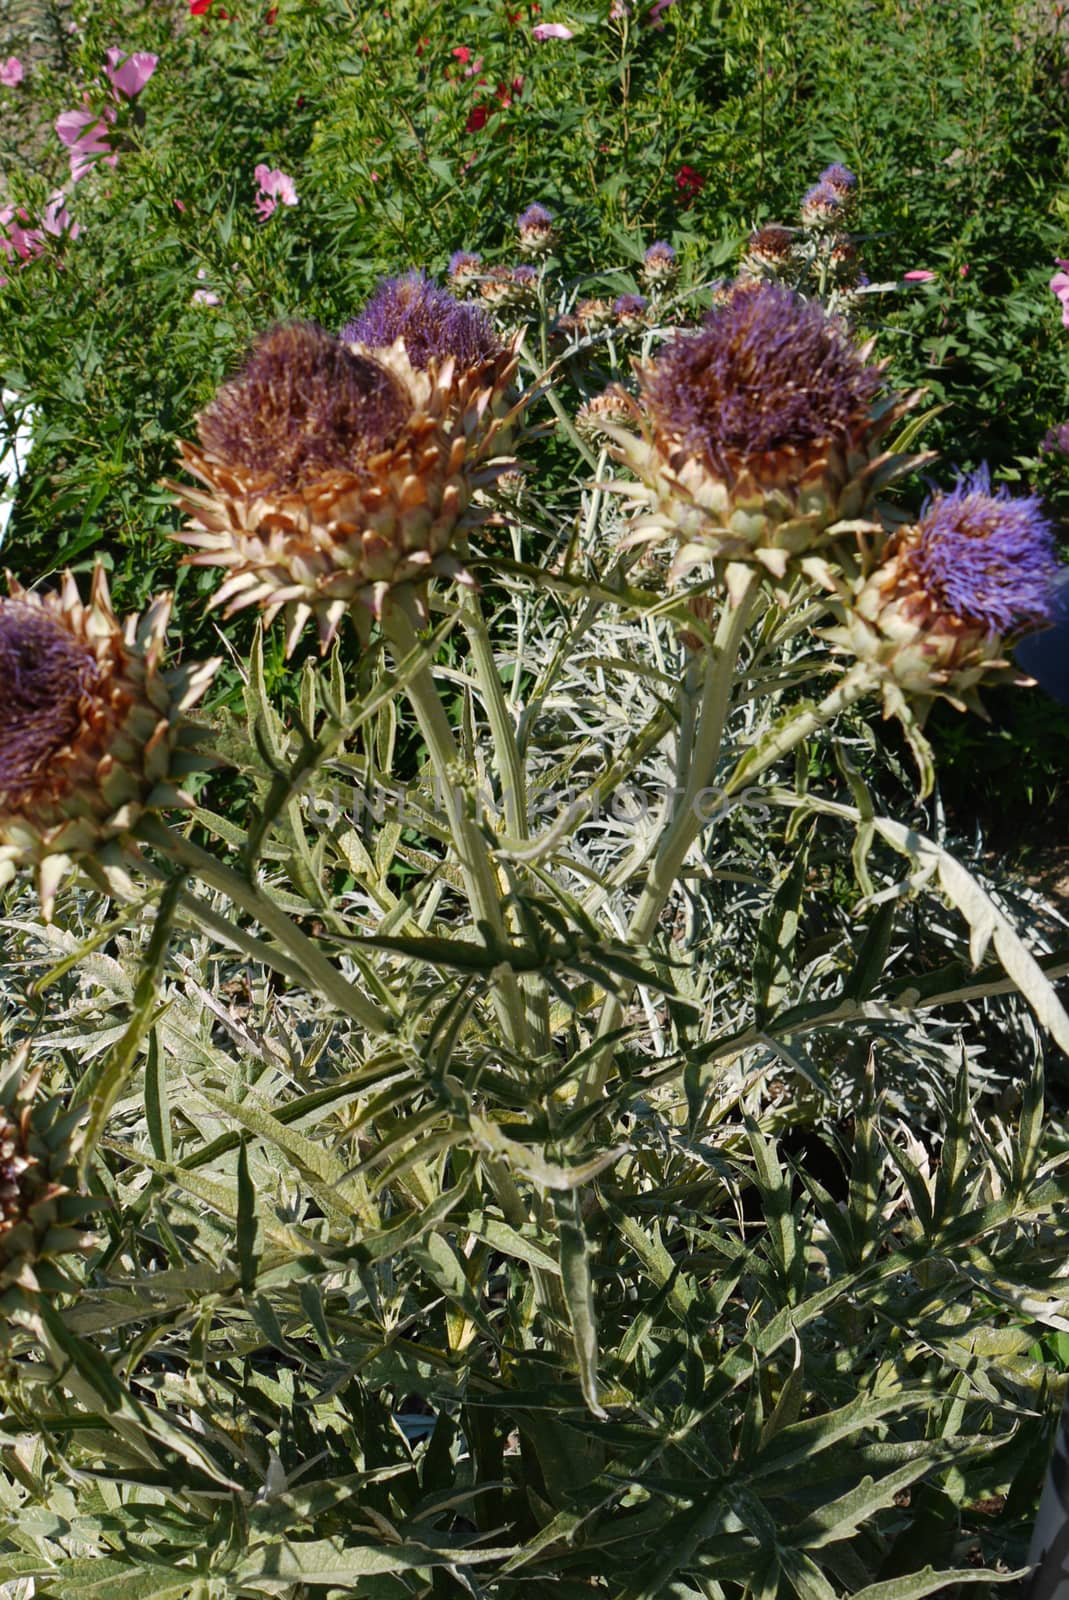 Flower burdock with a single stem and several branches with spin by Adamchuk